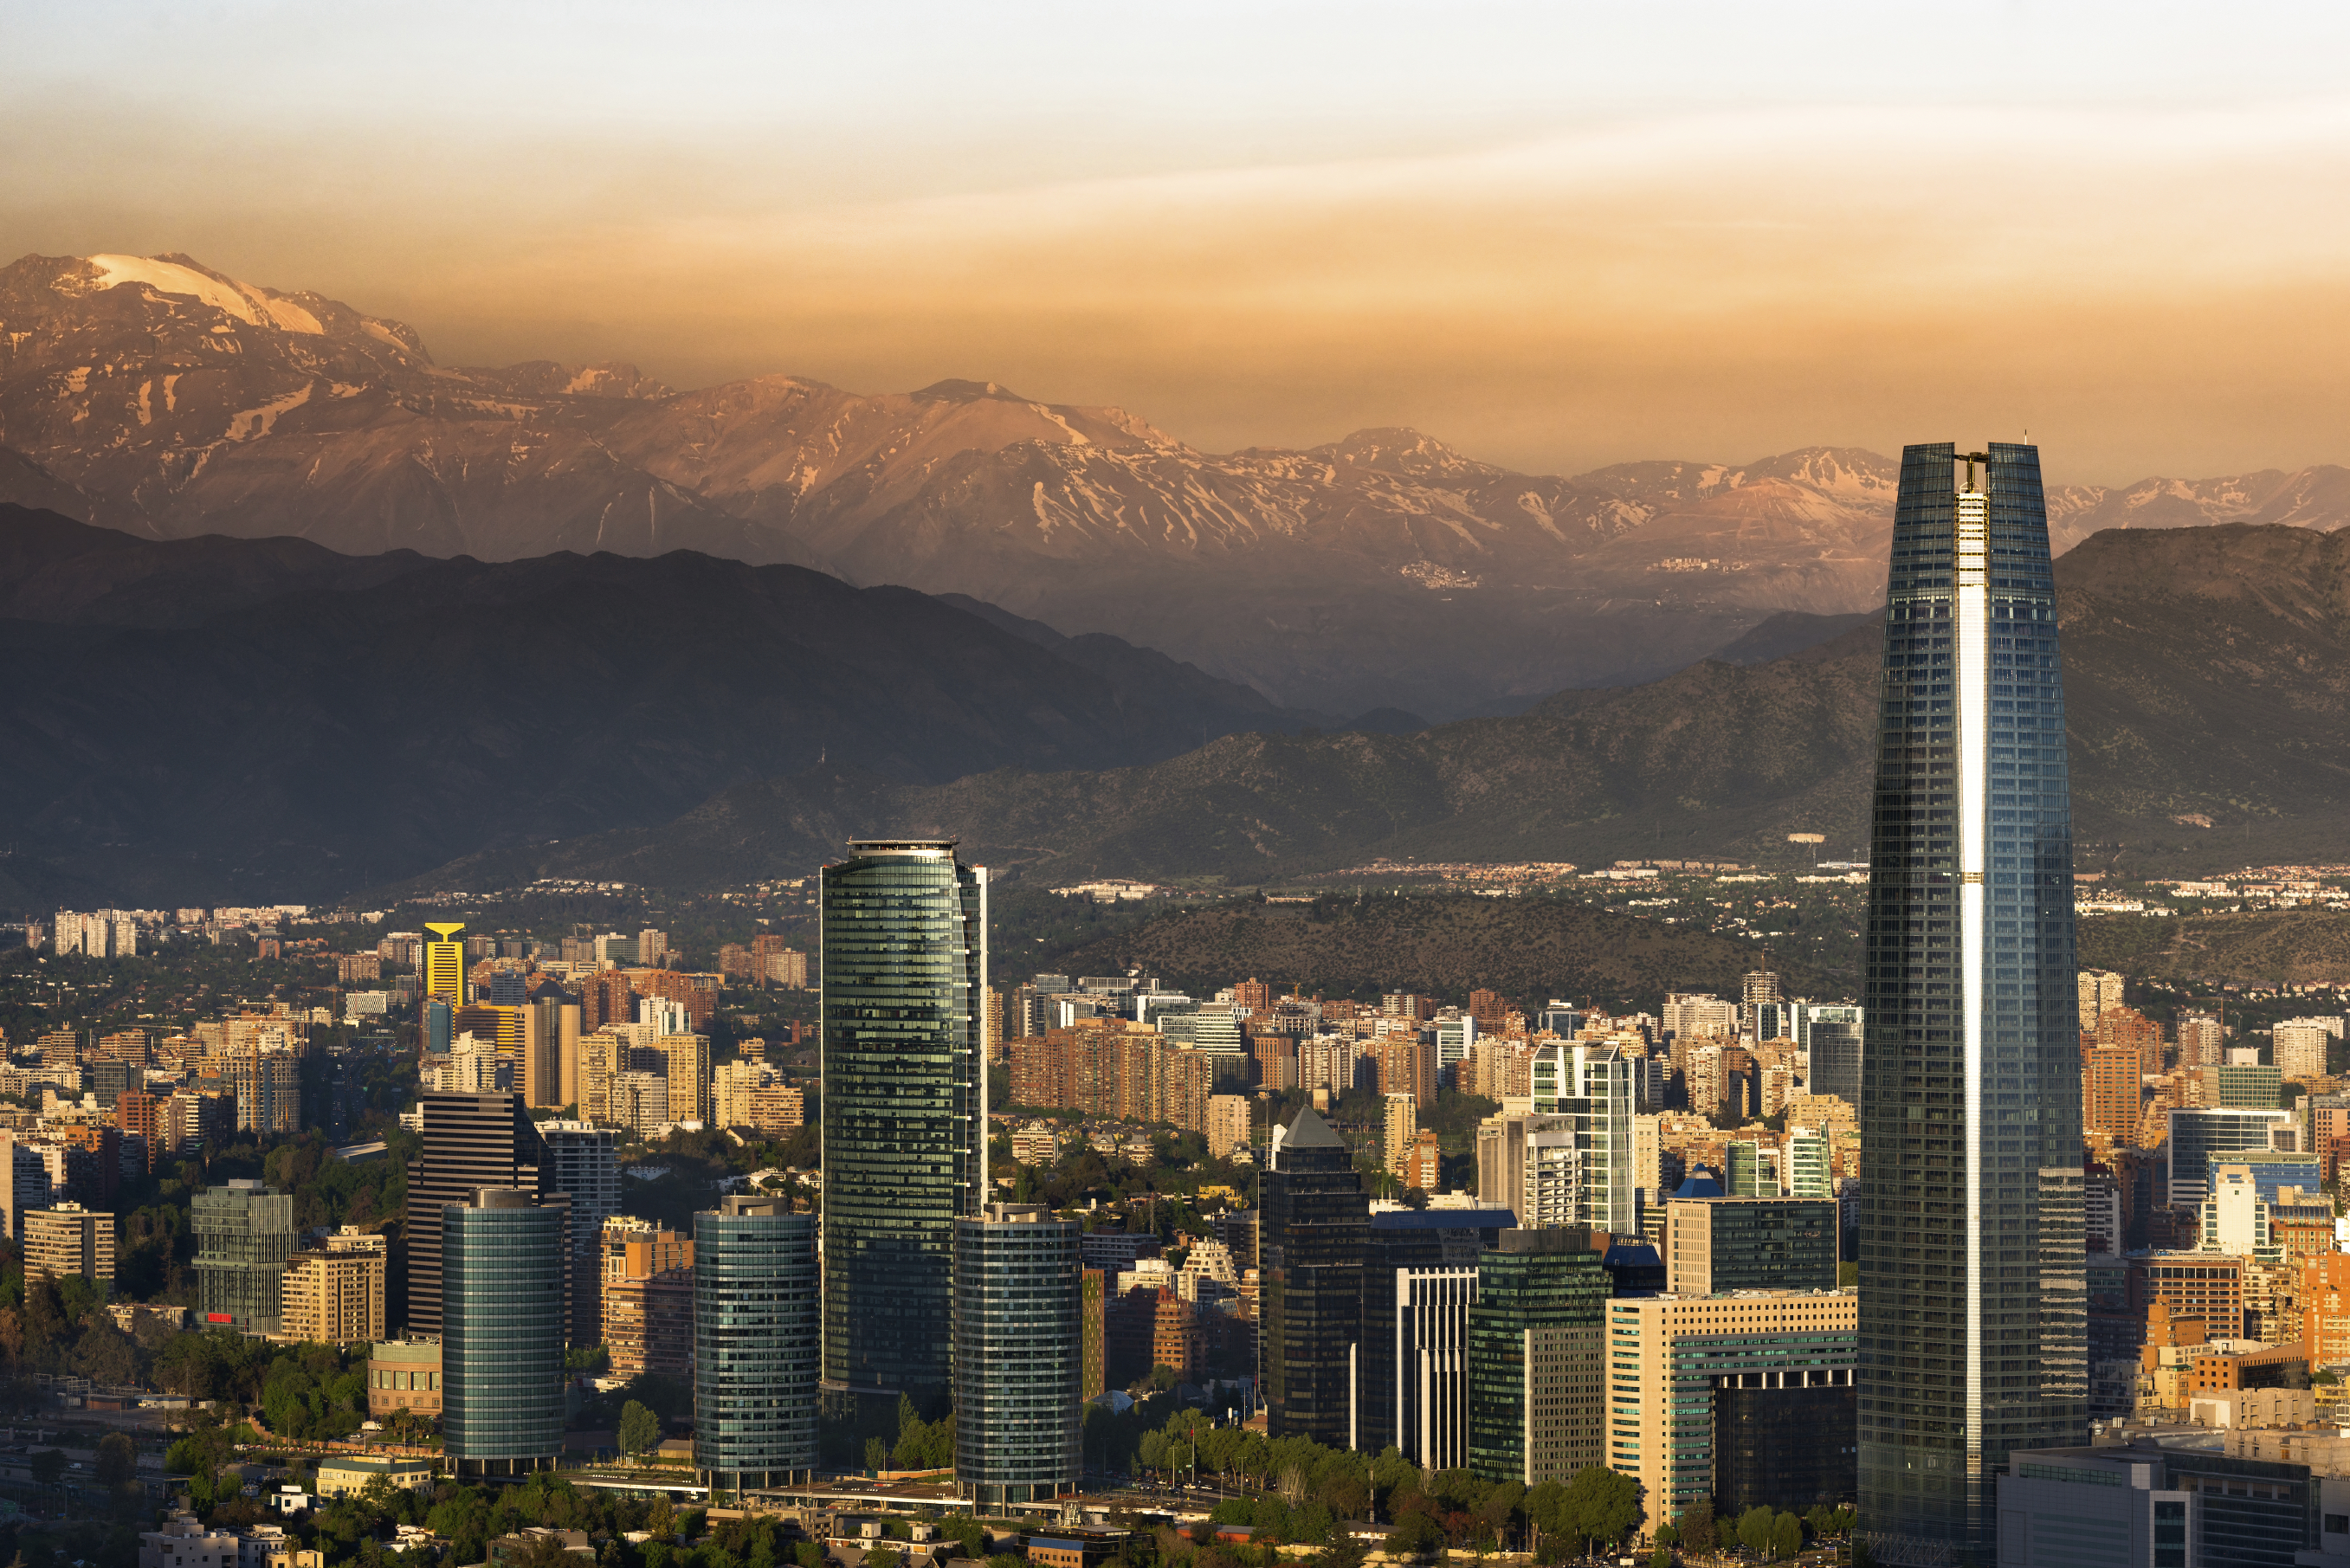 Santiago de Chile with Los Andes mountain range in the background (Getty Images)